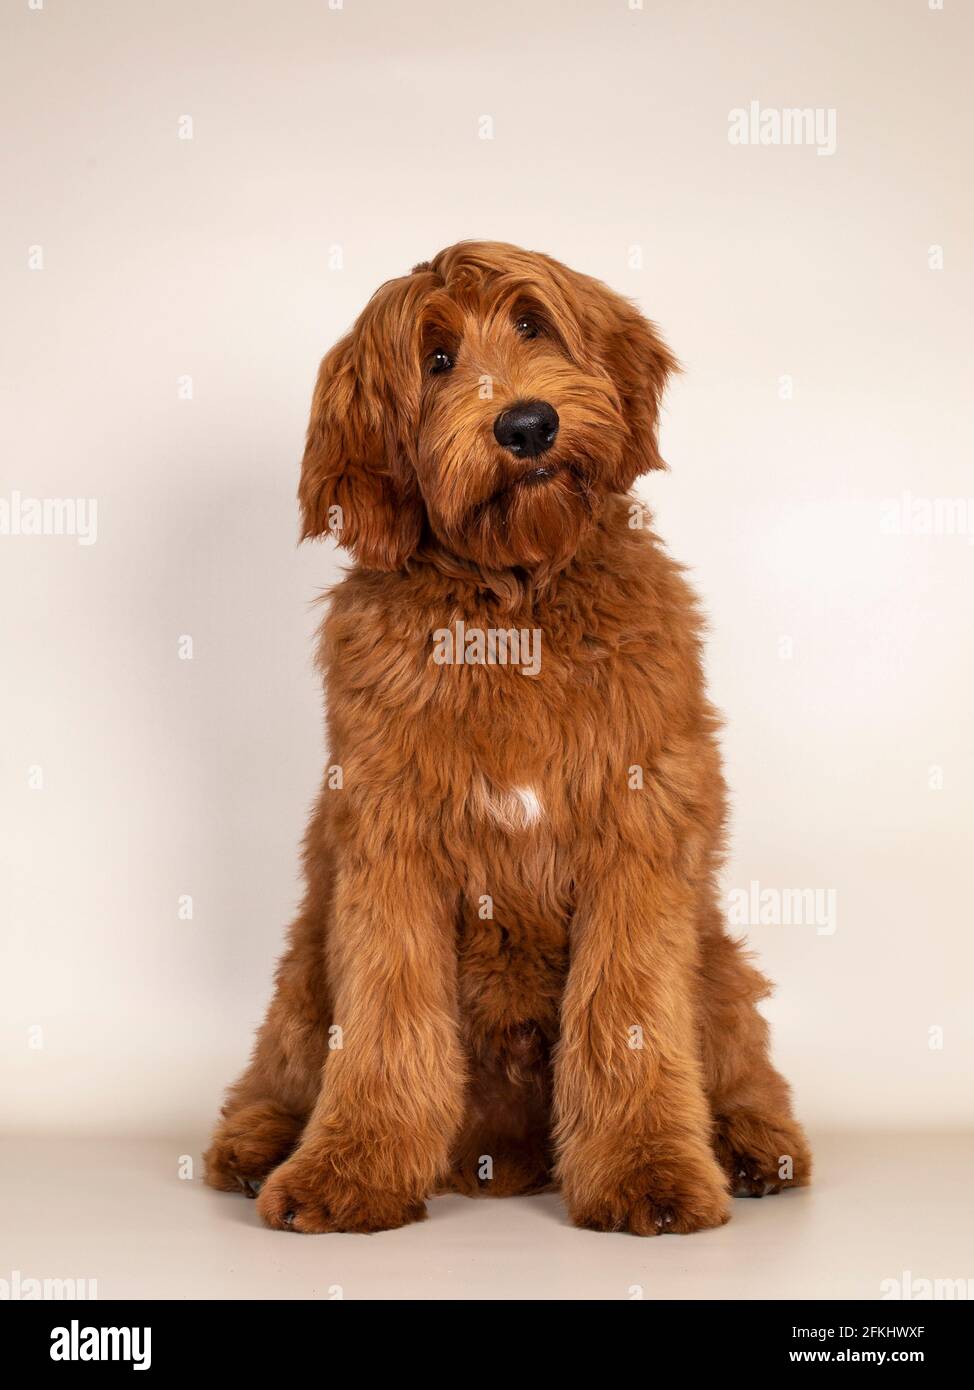 Handsome male apricot or red Australian Cobberdog aka Labradoodle, sitting up facing front. Looking friendly to camera. Black nose, mouth closed. Isol Stock Photo